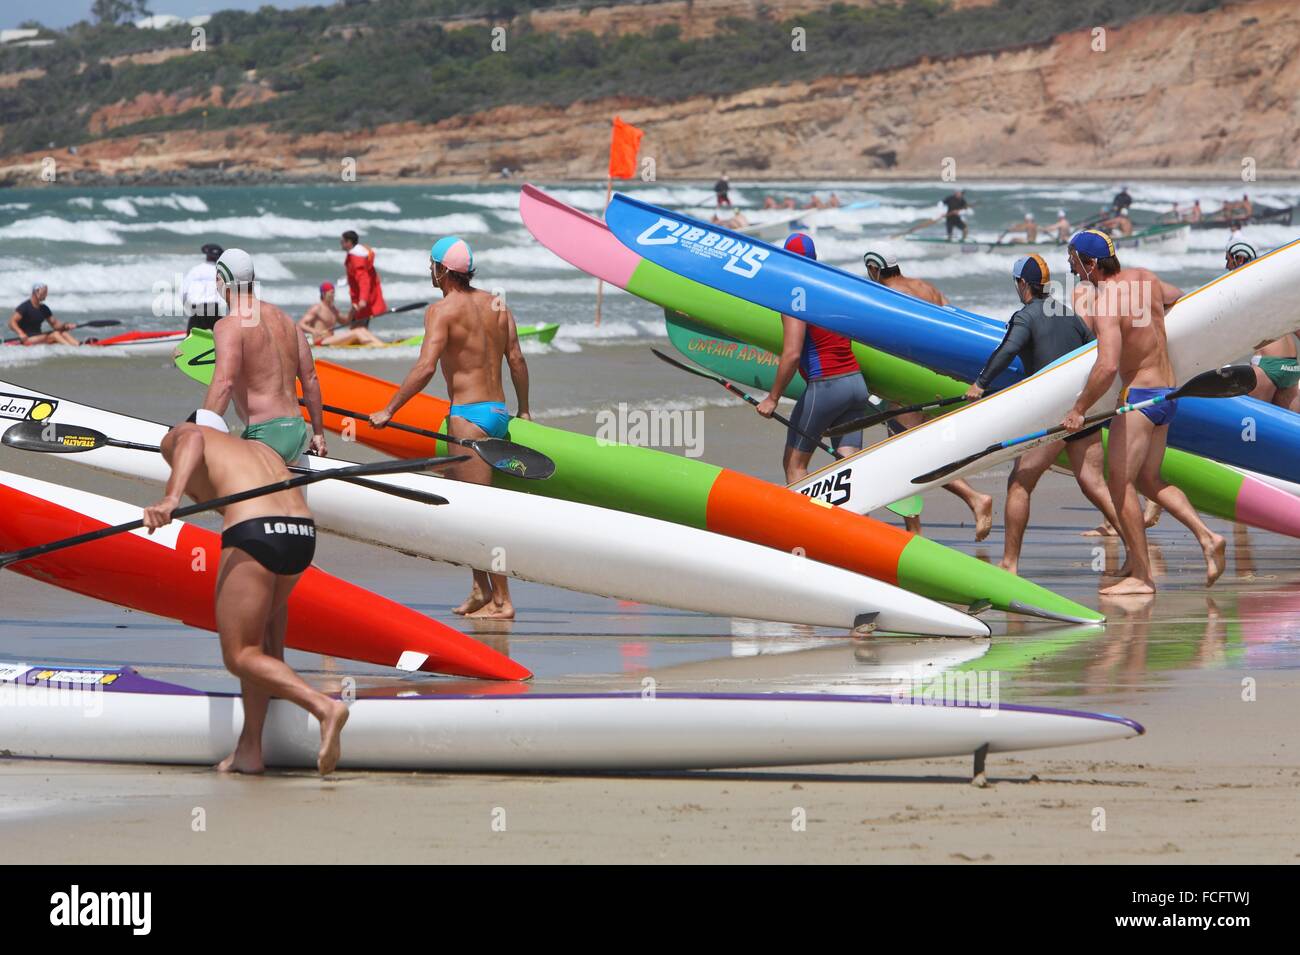 Surf ski race during a surf carnival in Victoria, Australia. Stock Photo